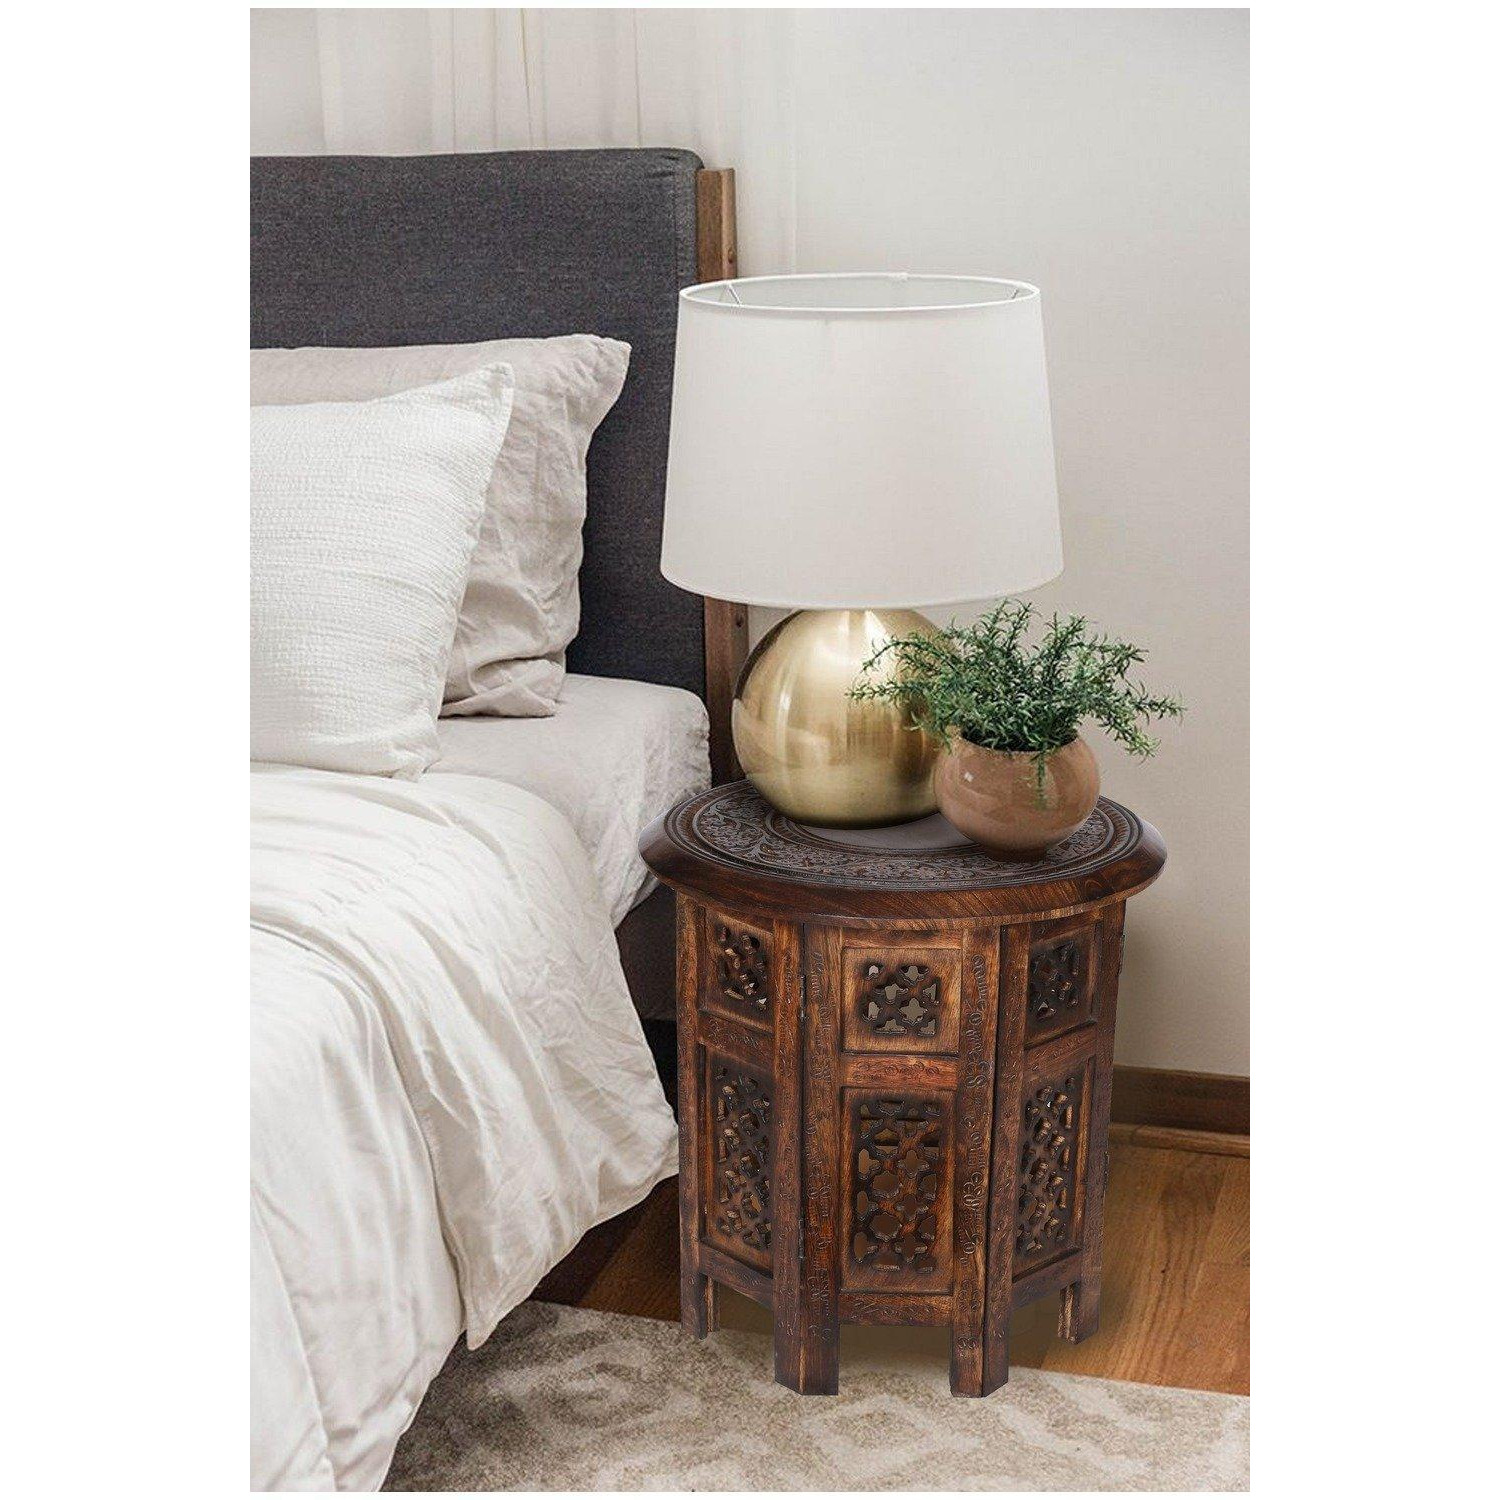 Antique Effect Round Carved Wooden Bedside End Table 30 x 30 x 30 cm - image 1